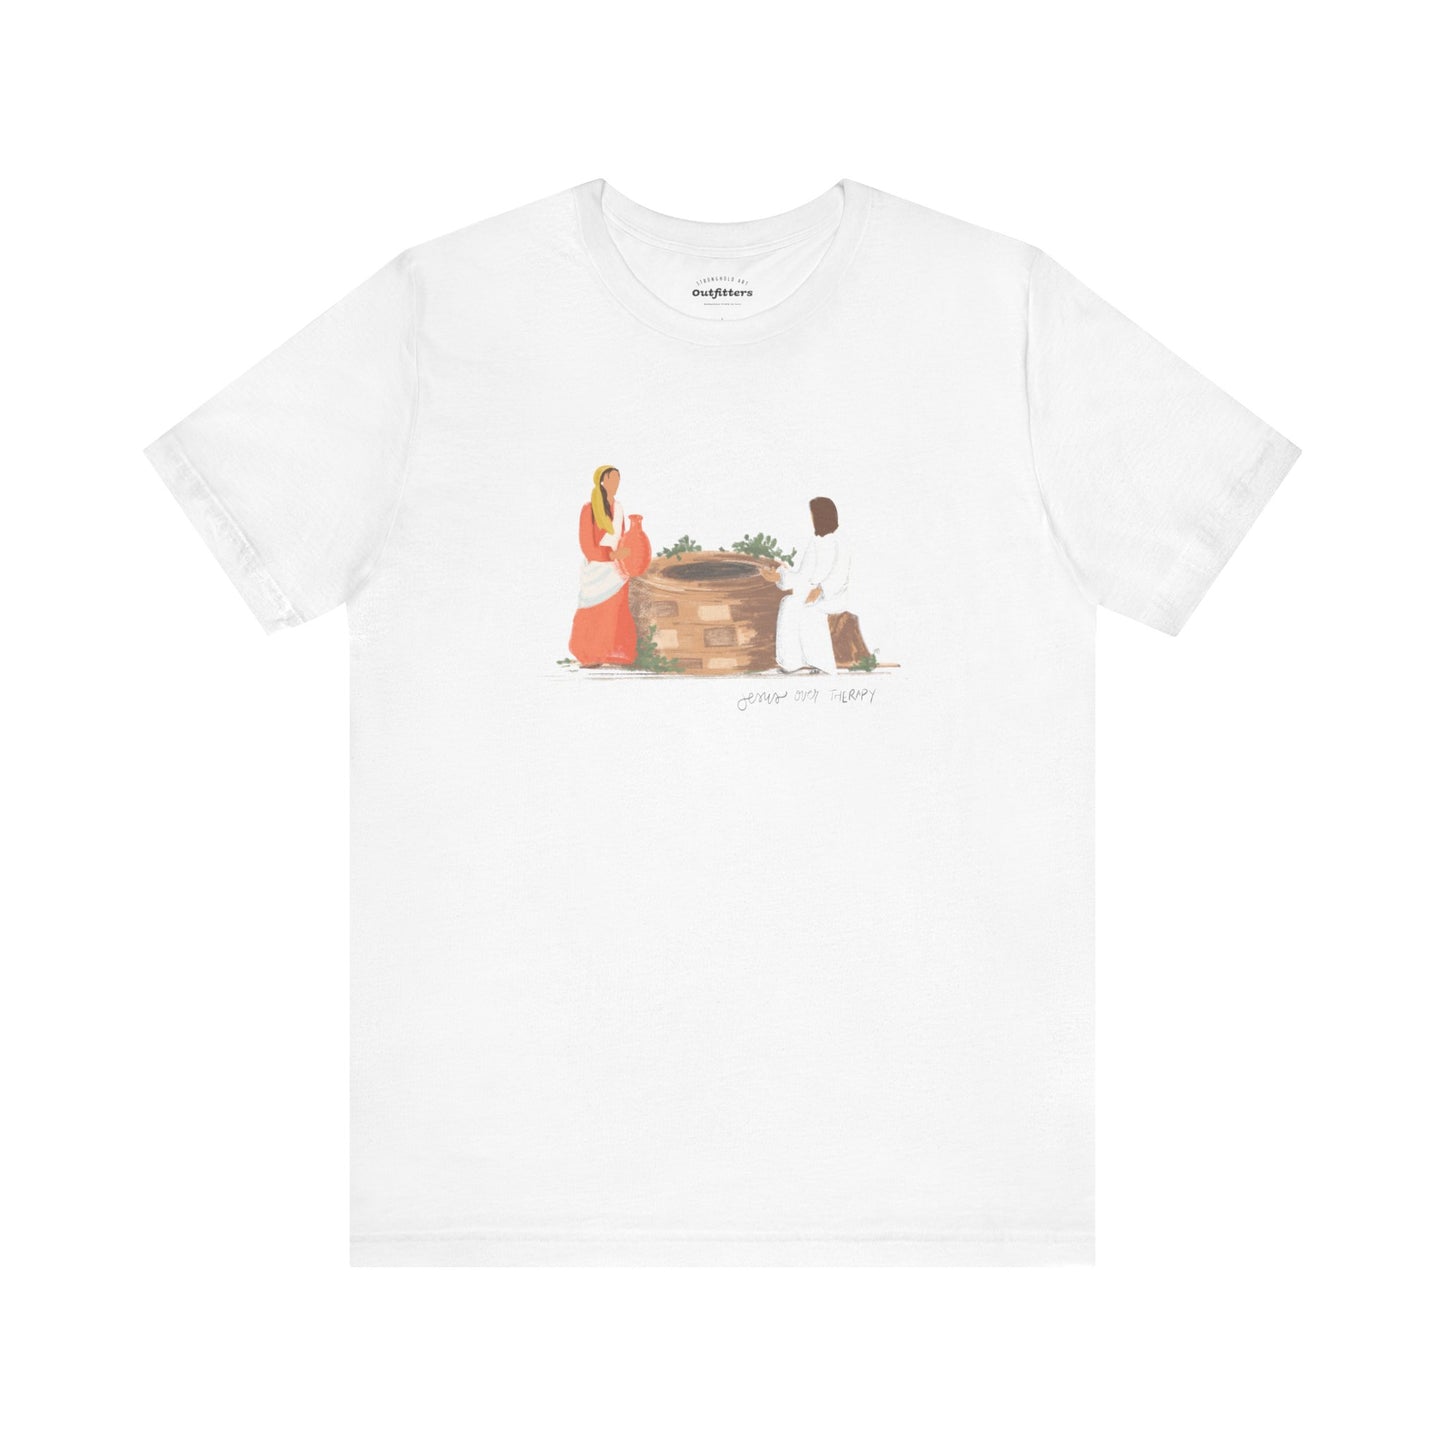 Jesus over Therapy T-shirt